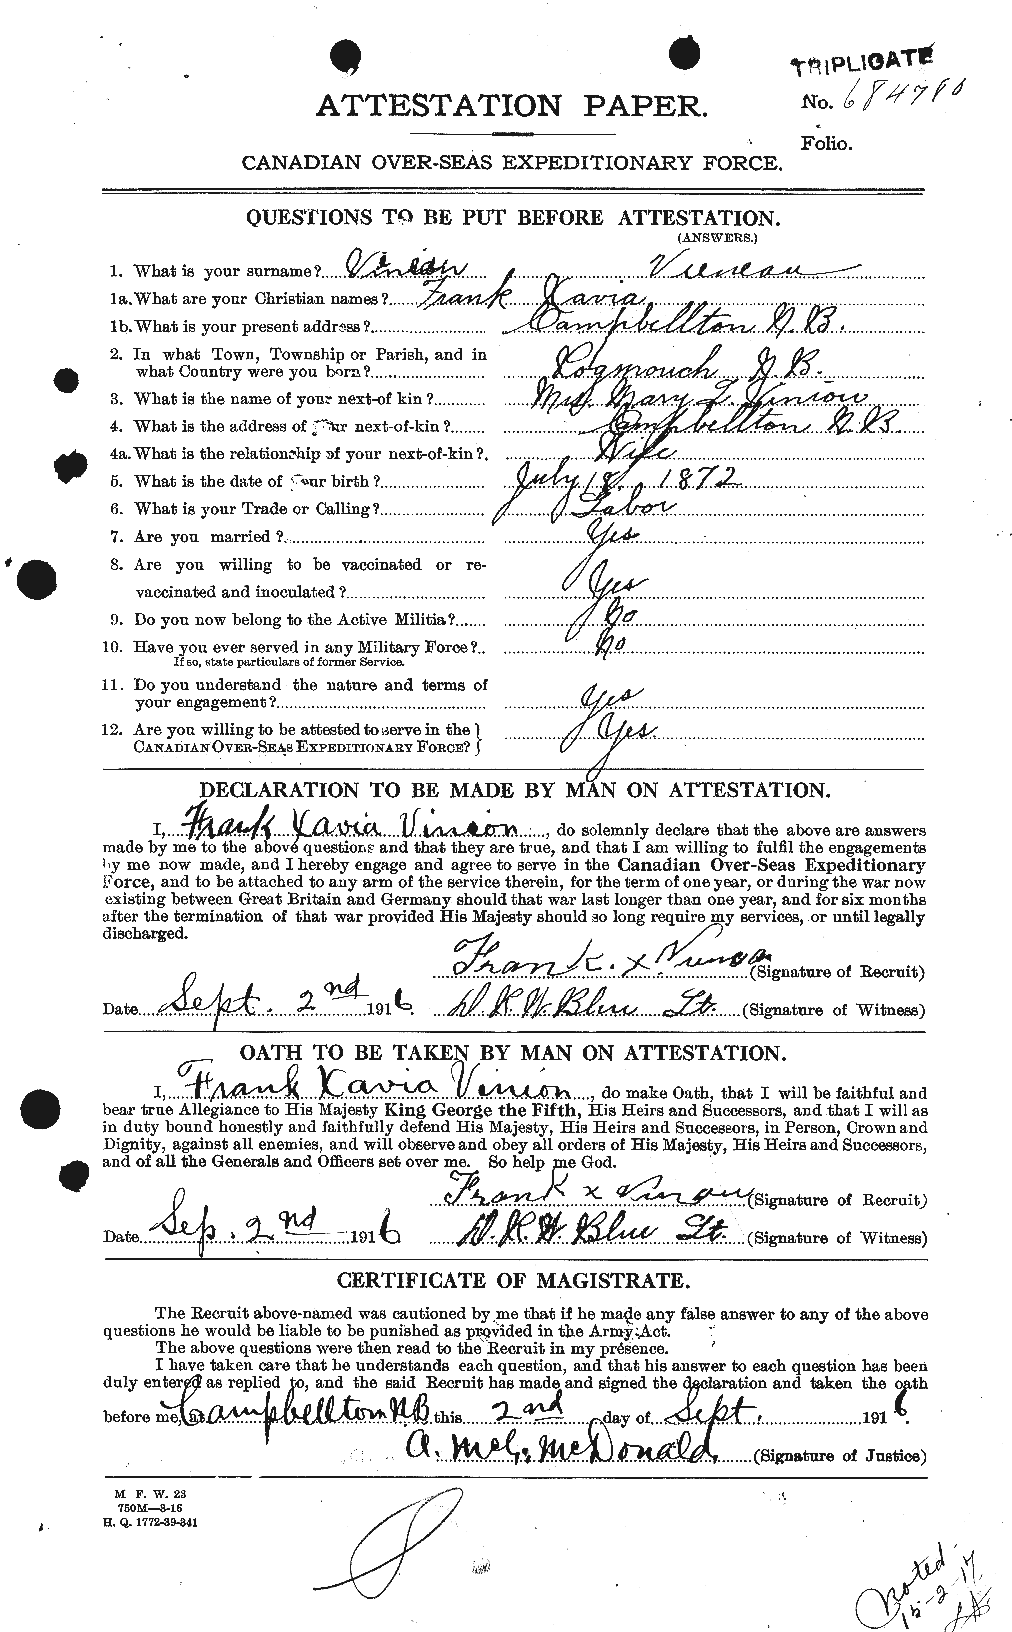 Personnel Records of the First World War - CEF 652367a